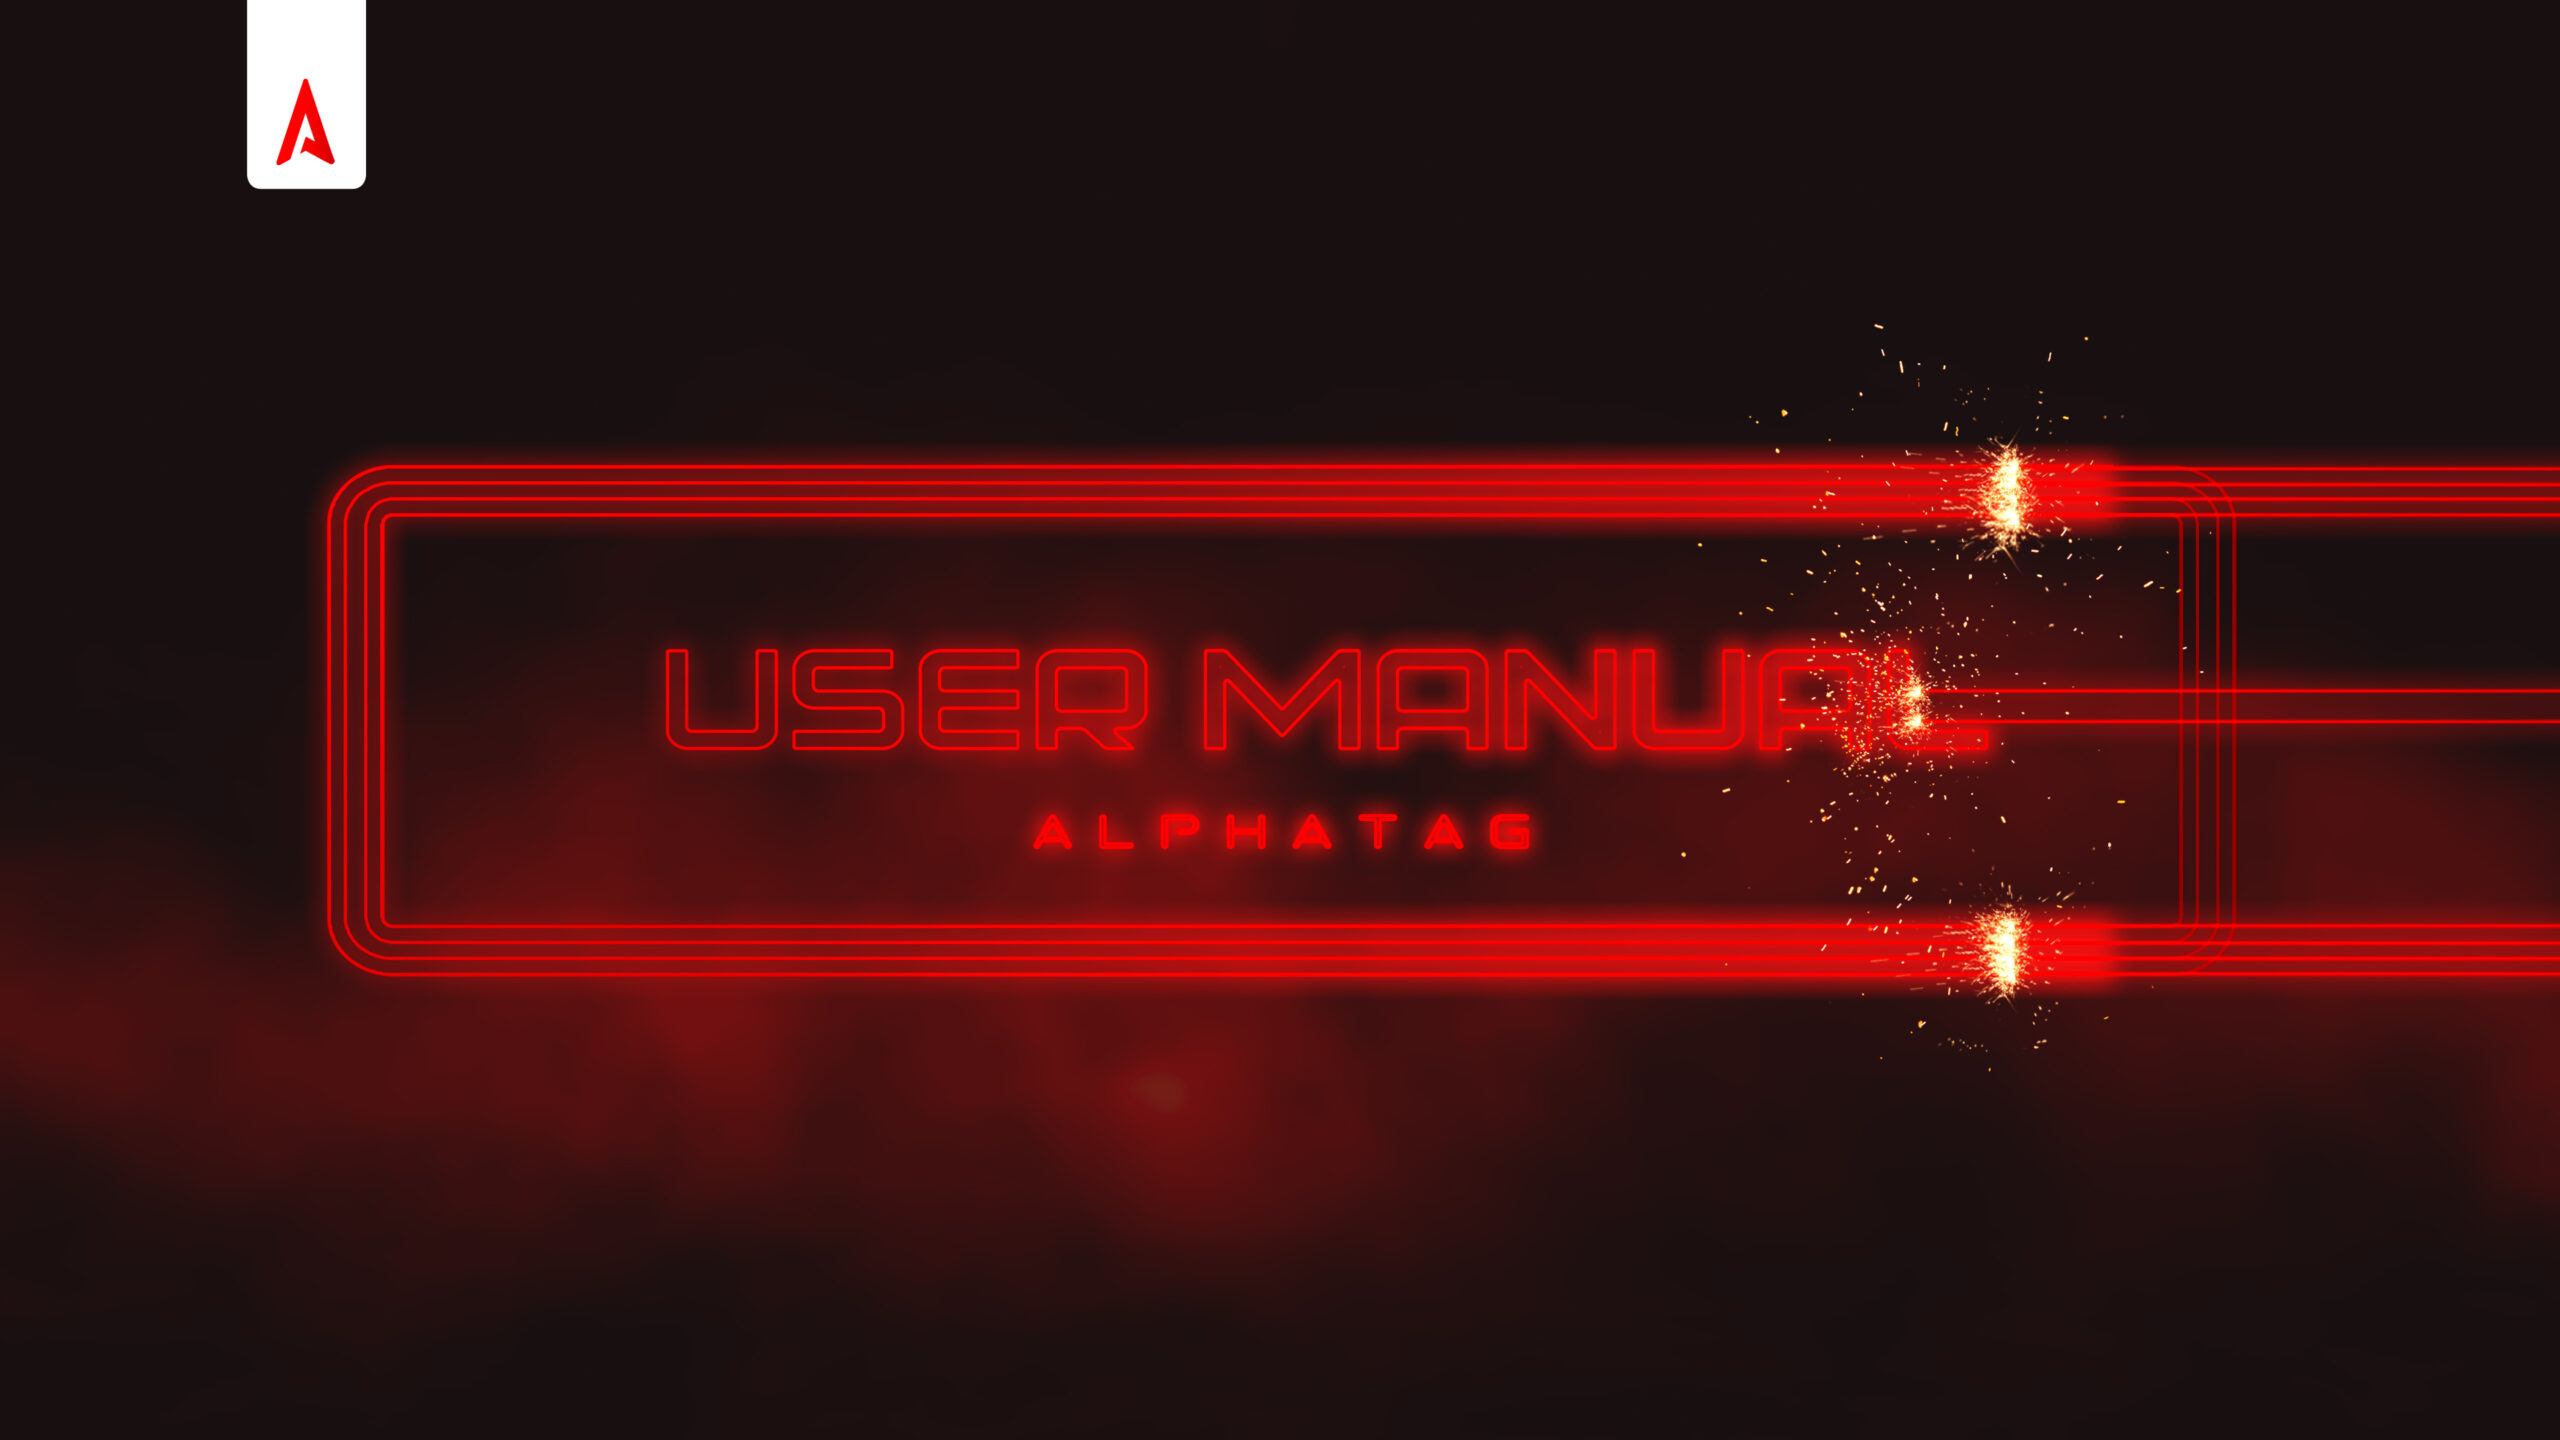 The biggest Alphatag update. User manual